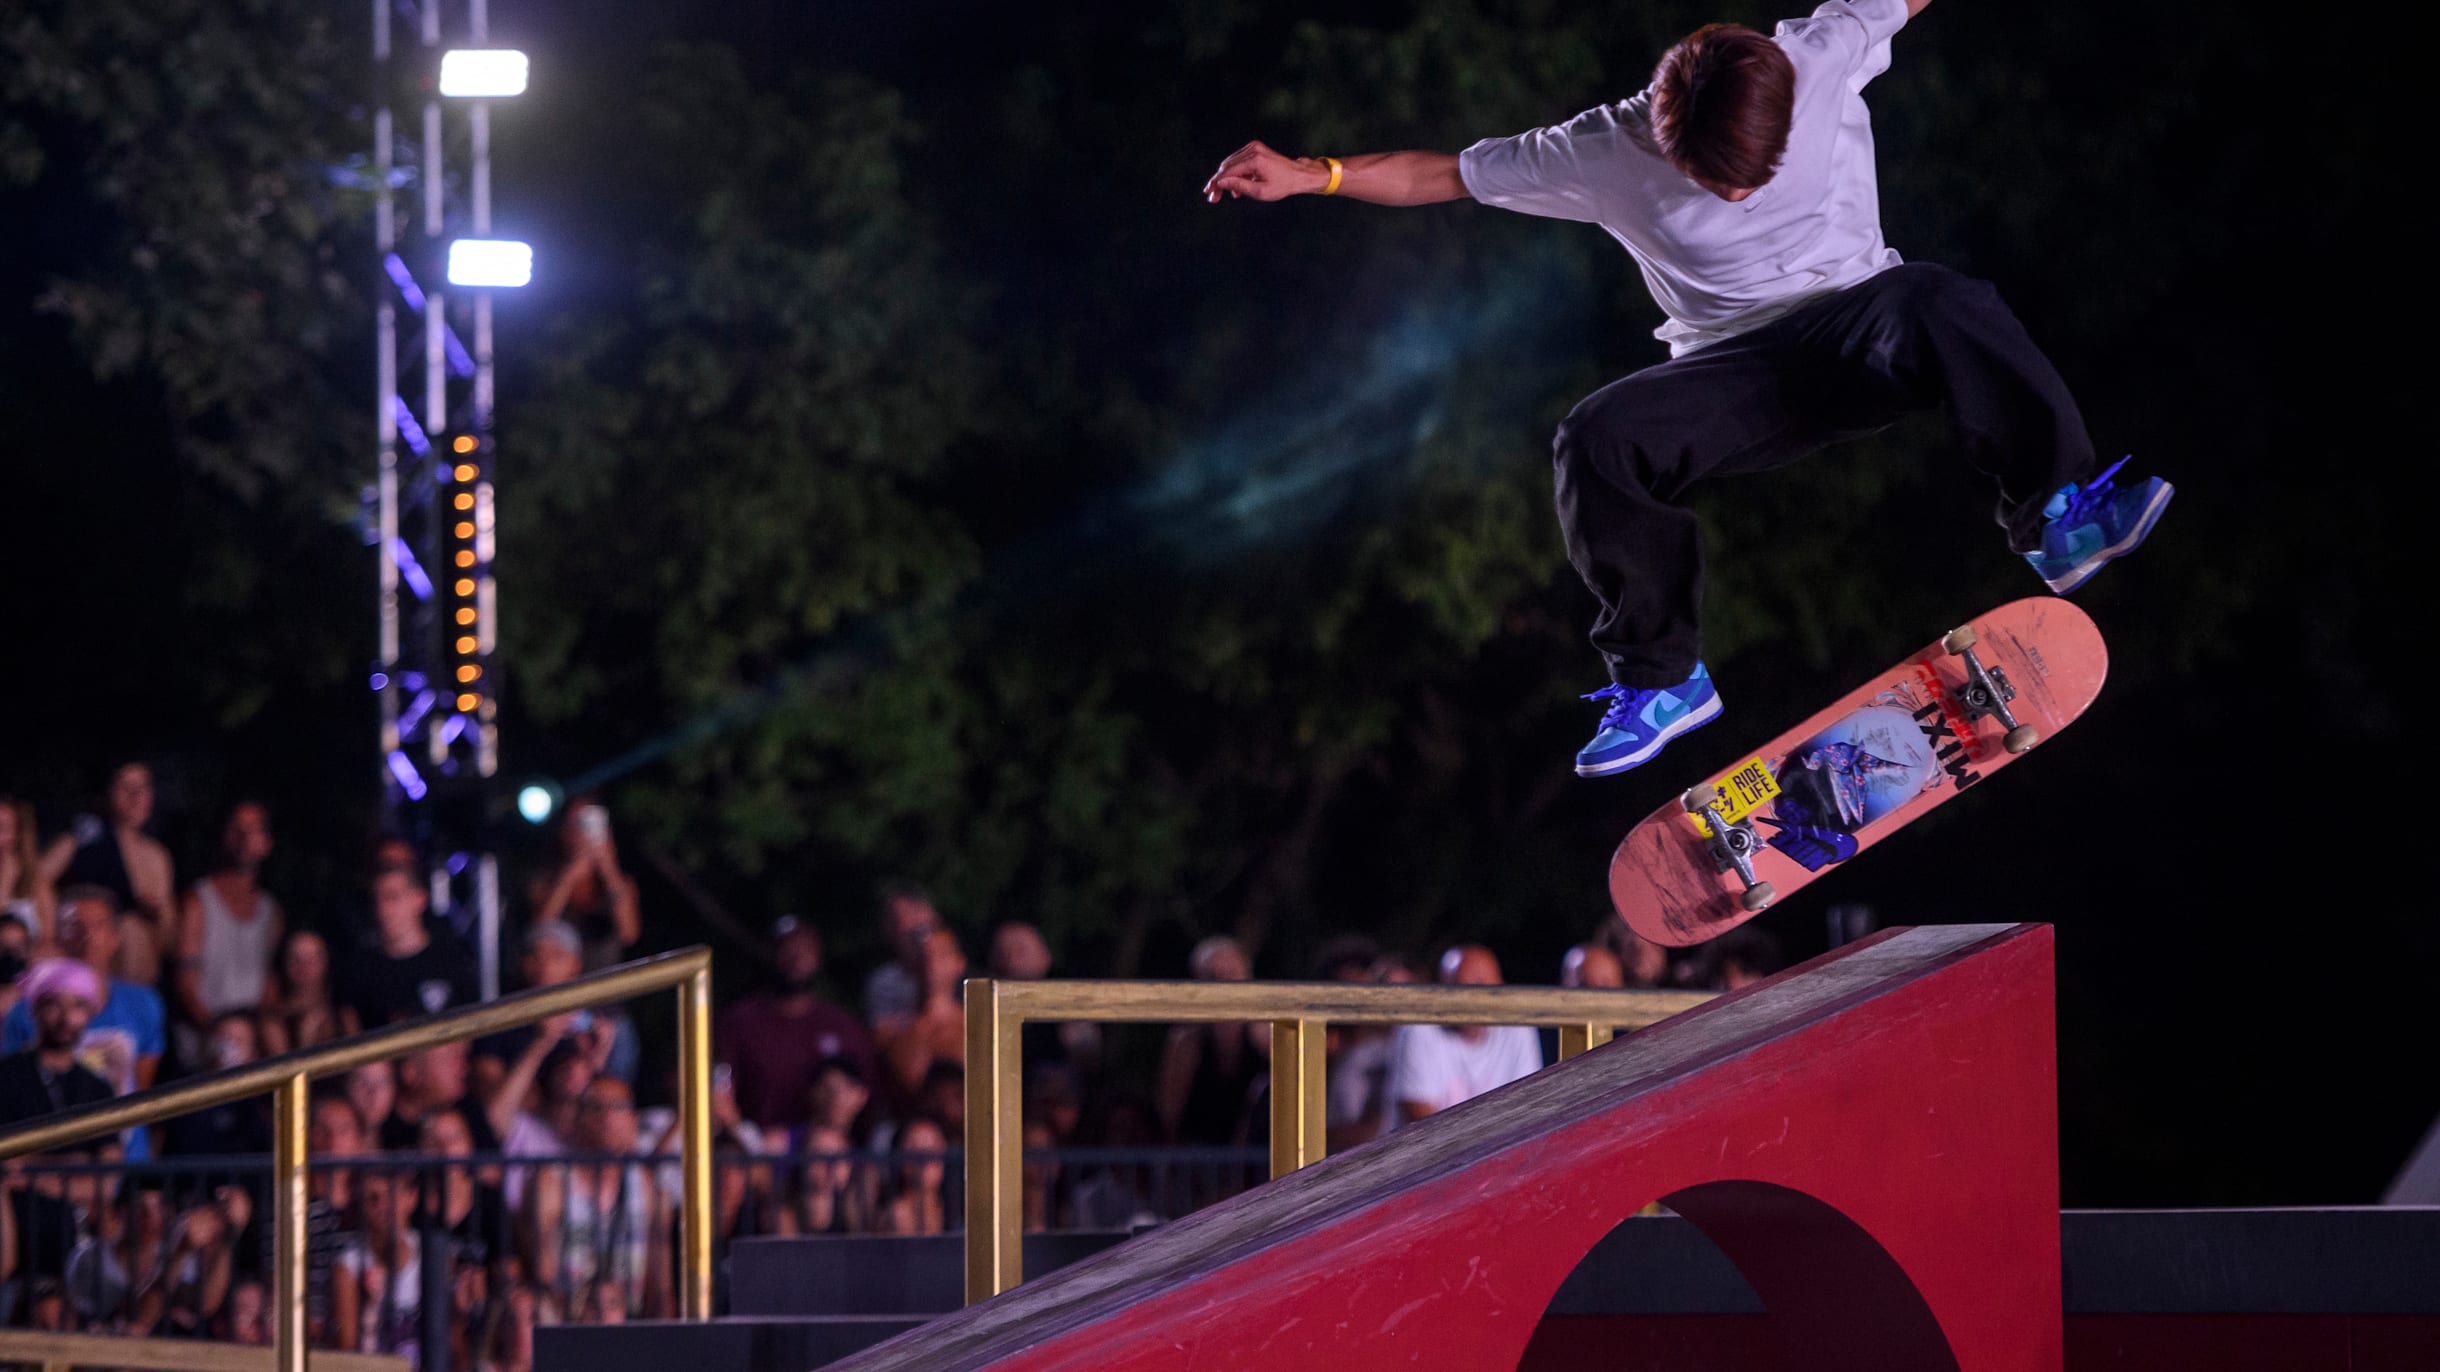 Zuidwest Door Worden World street skateboarding championships in 2023: Preview and stars to  watch at the Paris 2024 qualification event